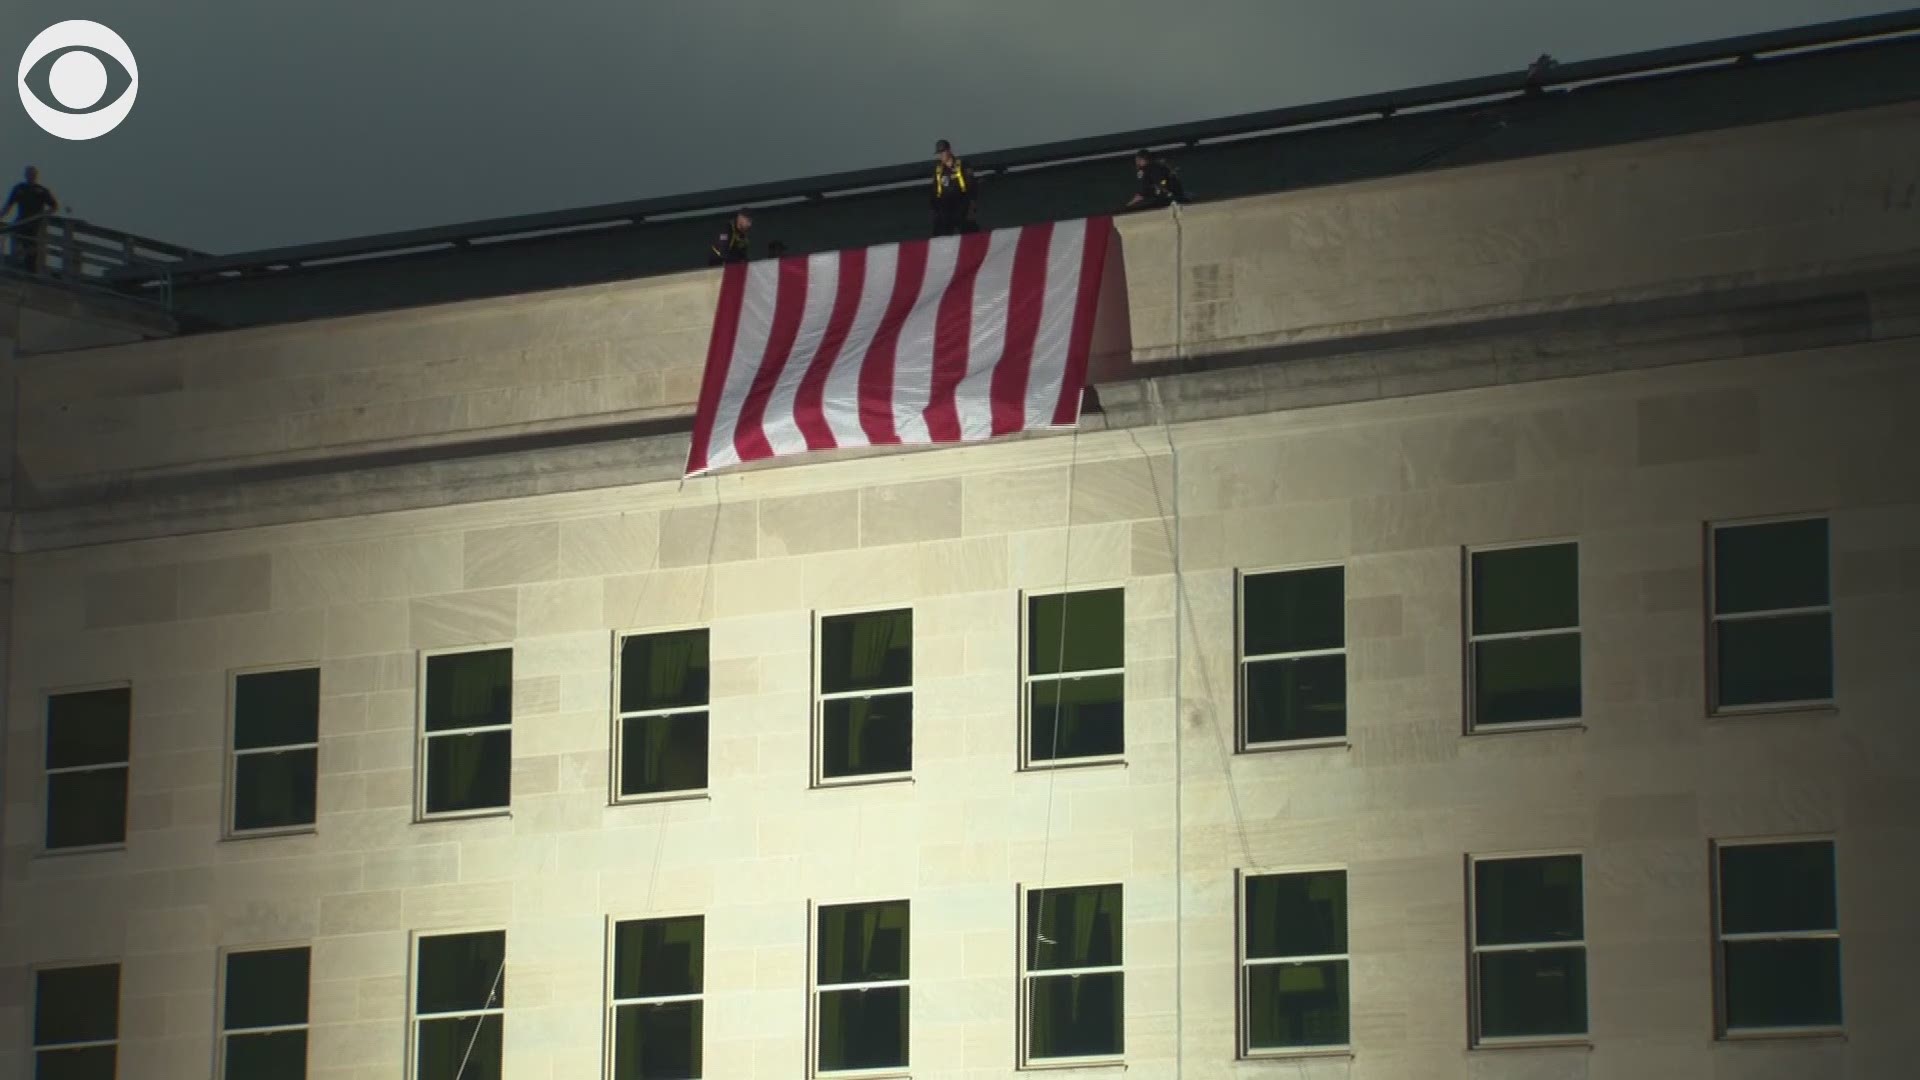 Watch as an American flag is unfurled at the Pentagon to mark 18 years since the September 11th terrorist attacks.